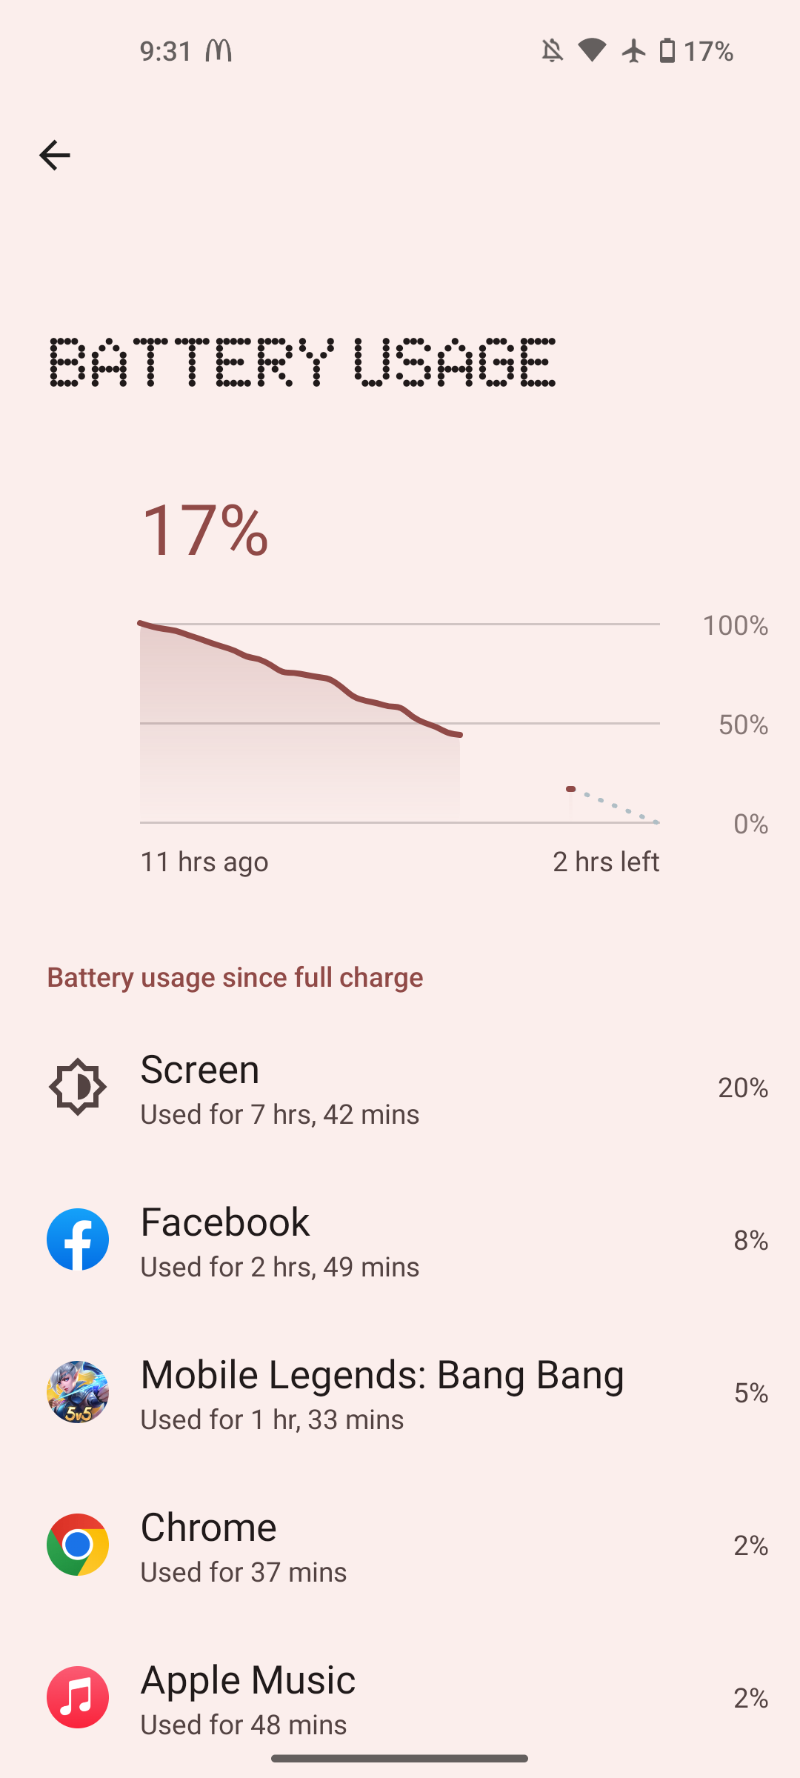 The battery usage